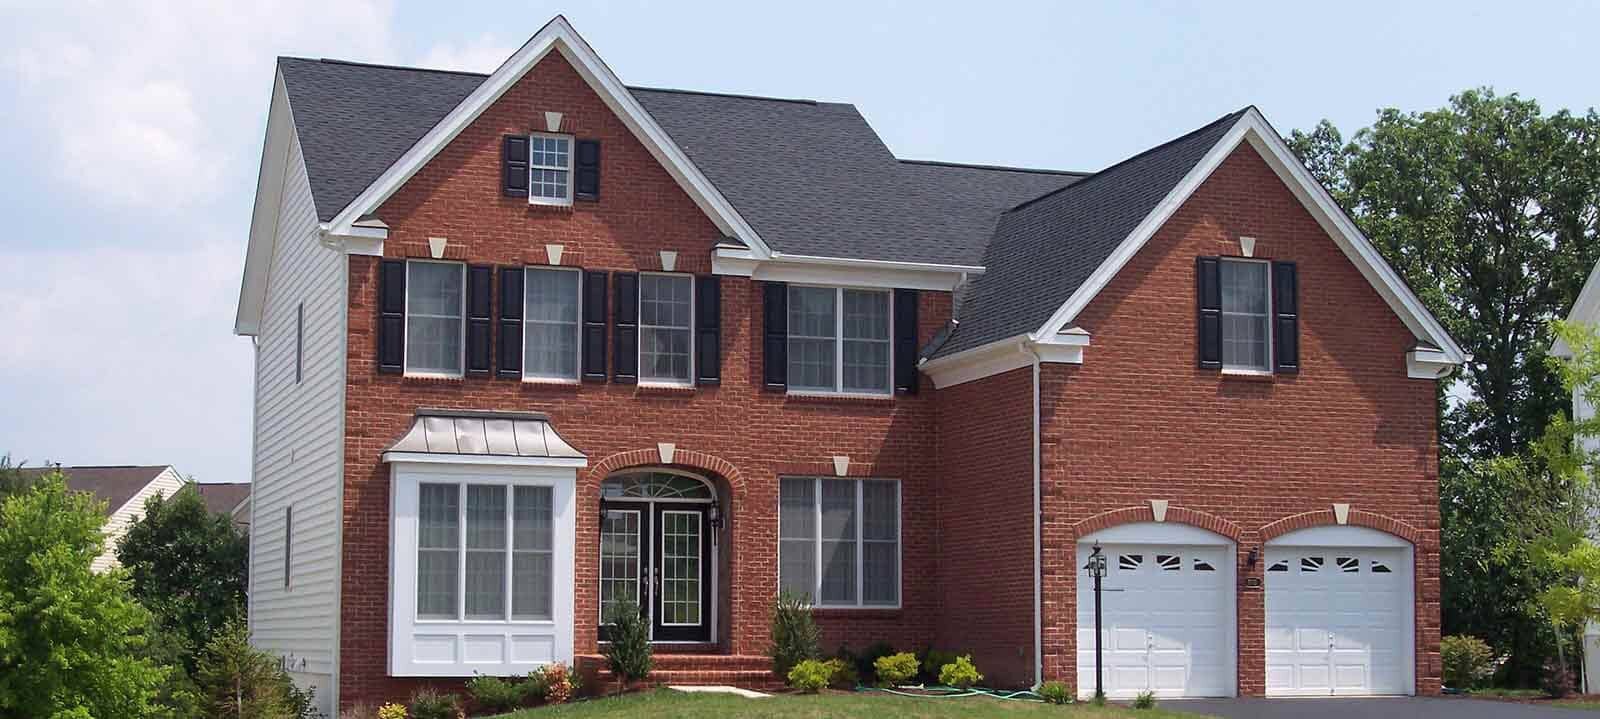 Home Exterior Services in Daleview Dr Mclean VA